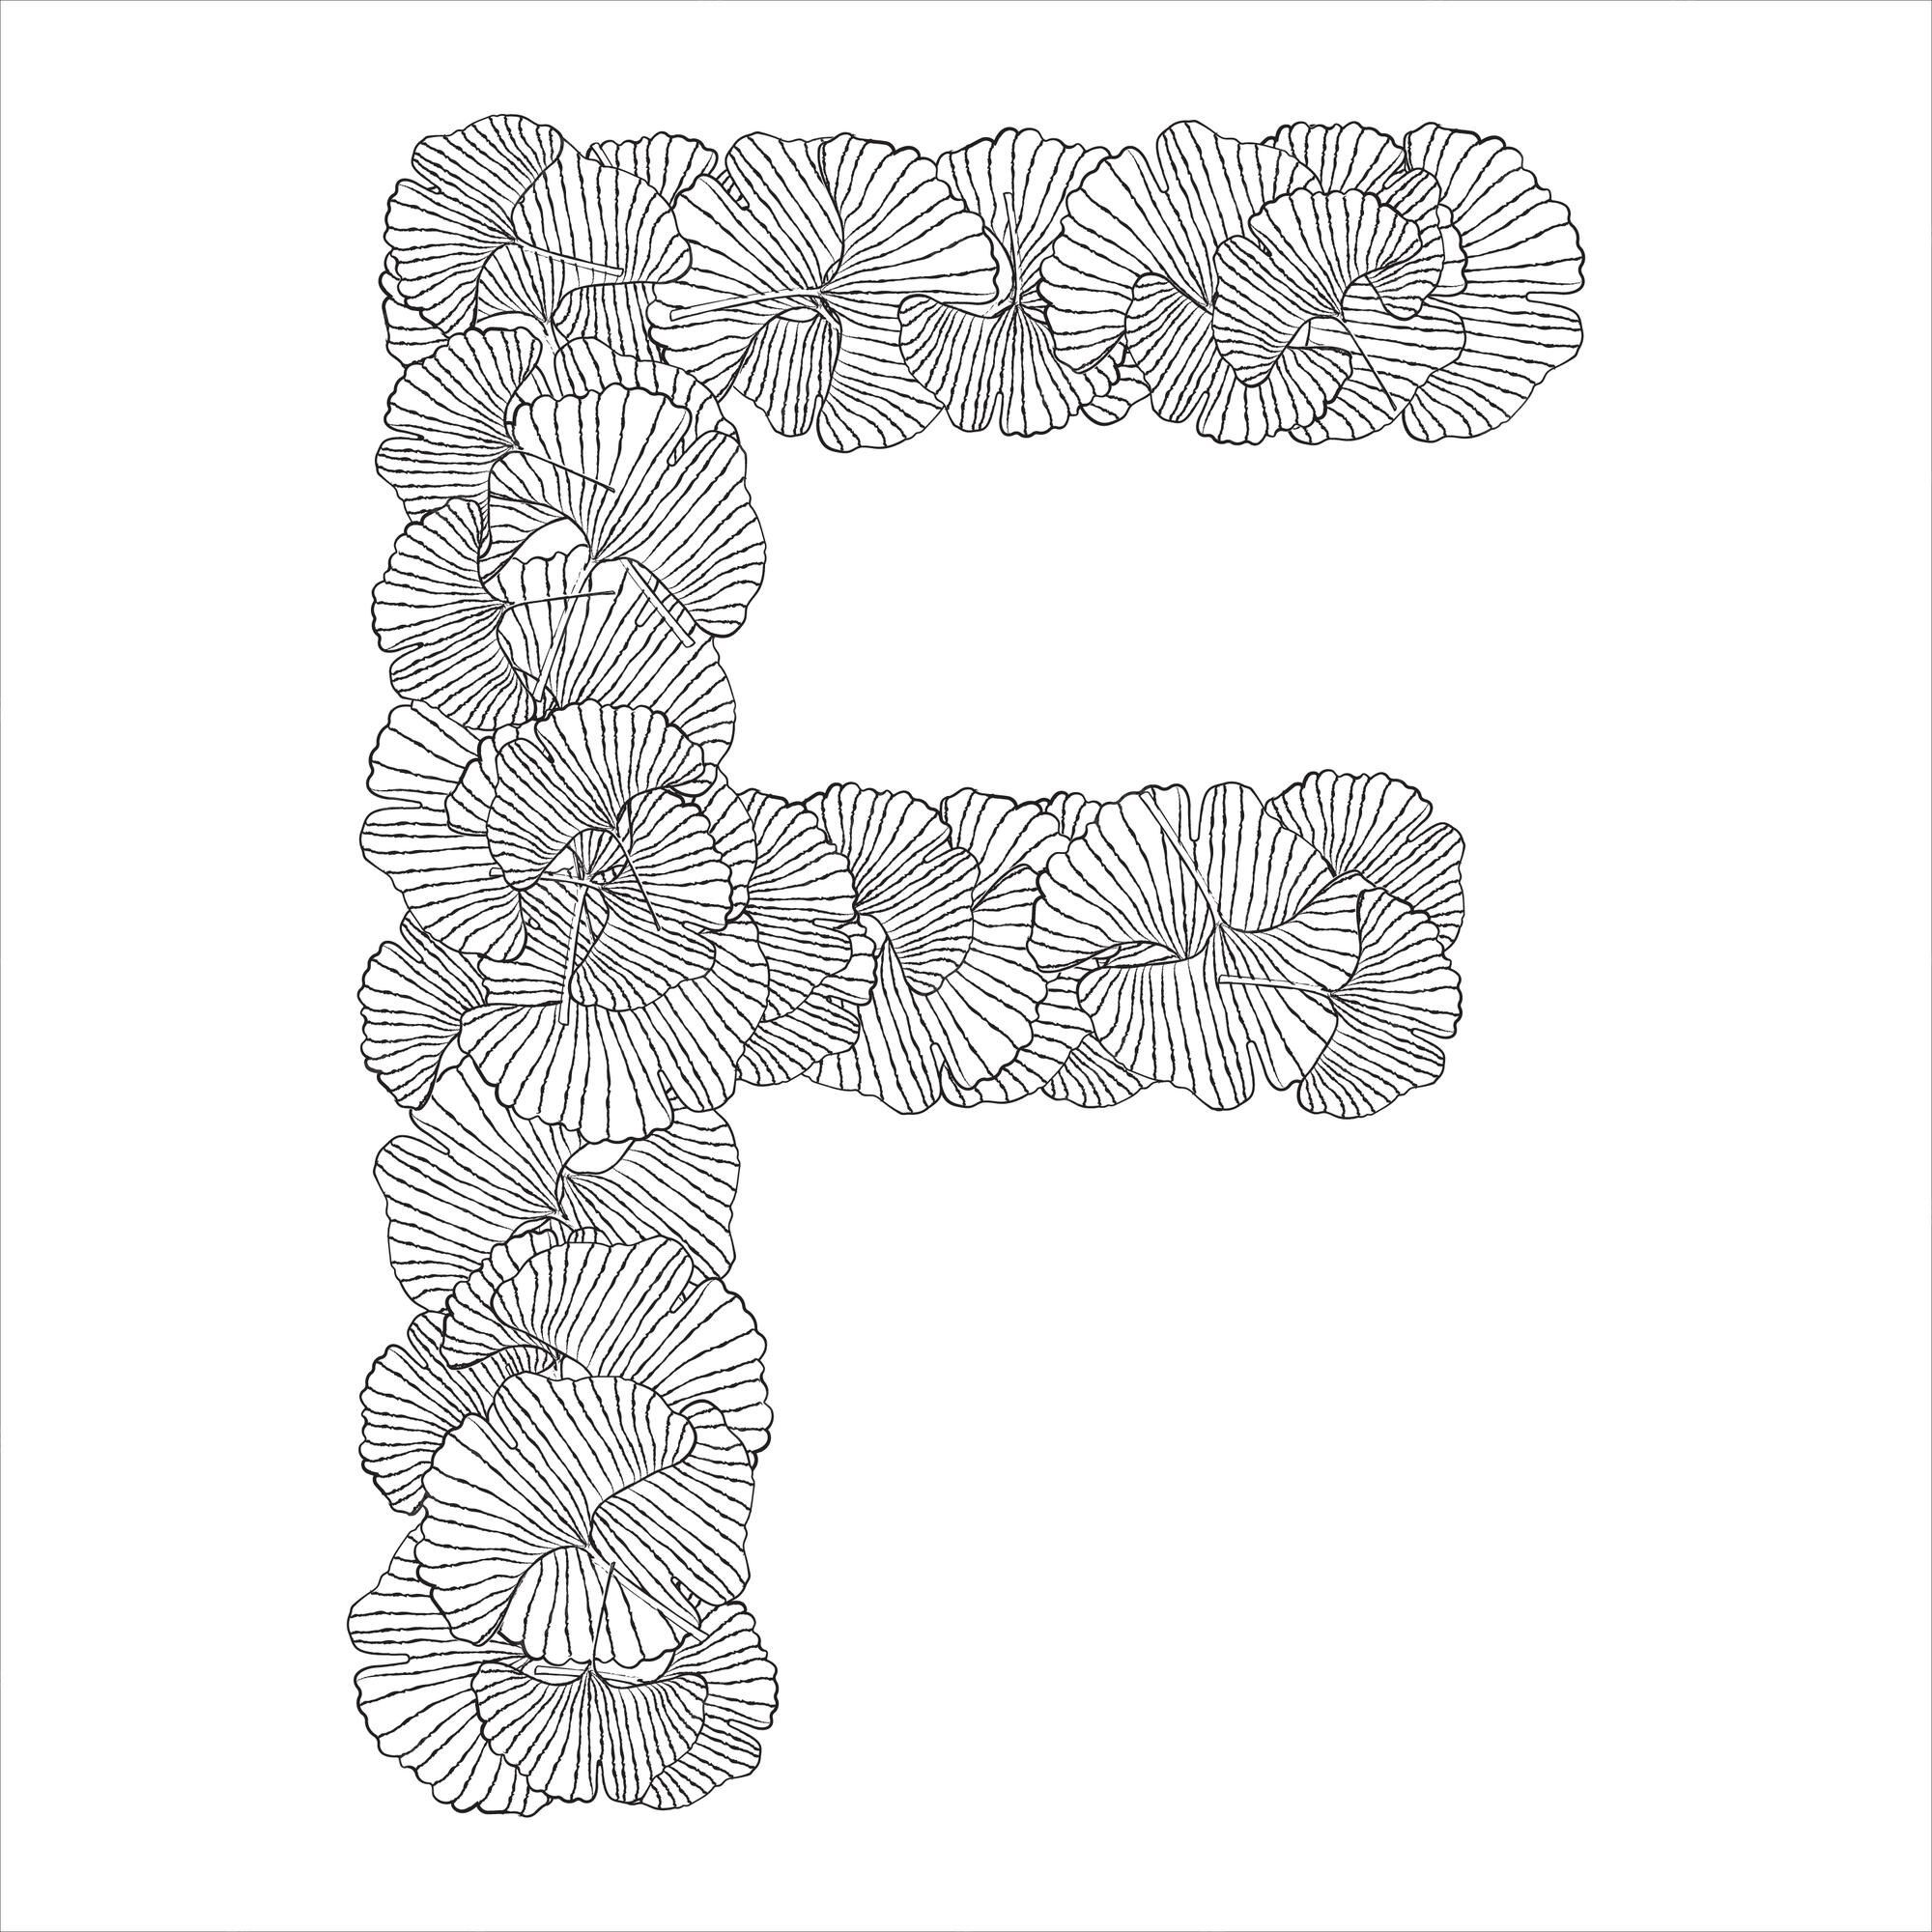 Premium vector hand drawn capital letter f in black coloring sheet for adults